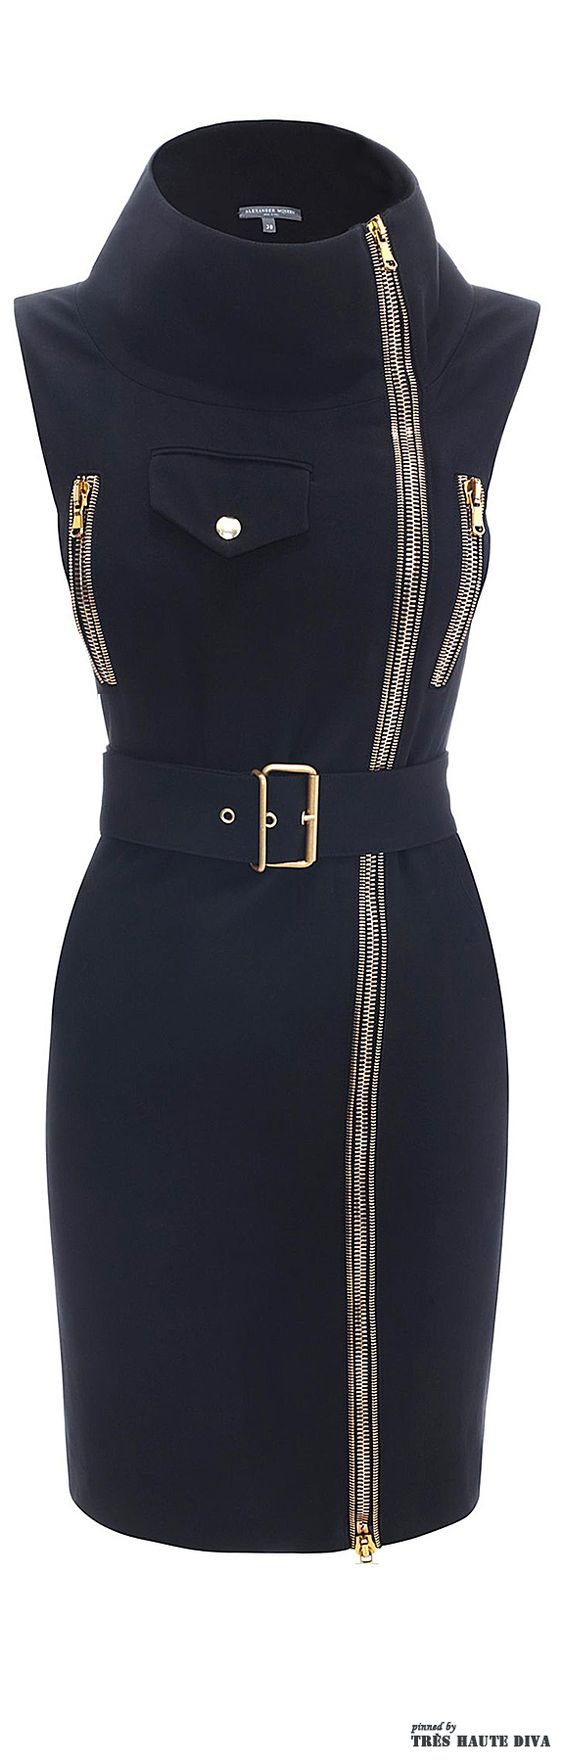 Military inspired dress with zippers